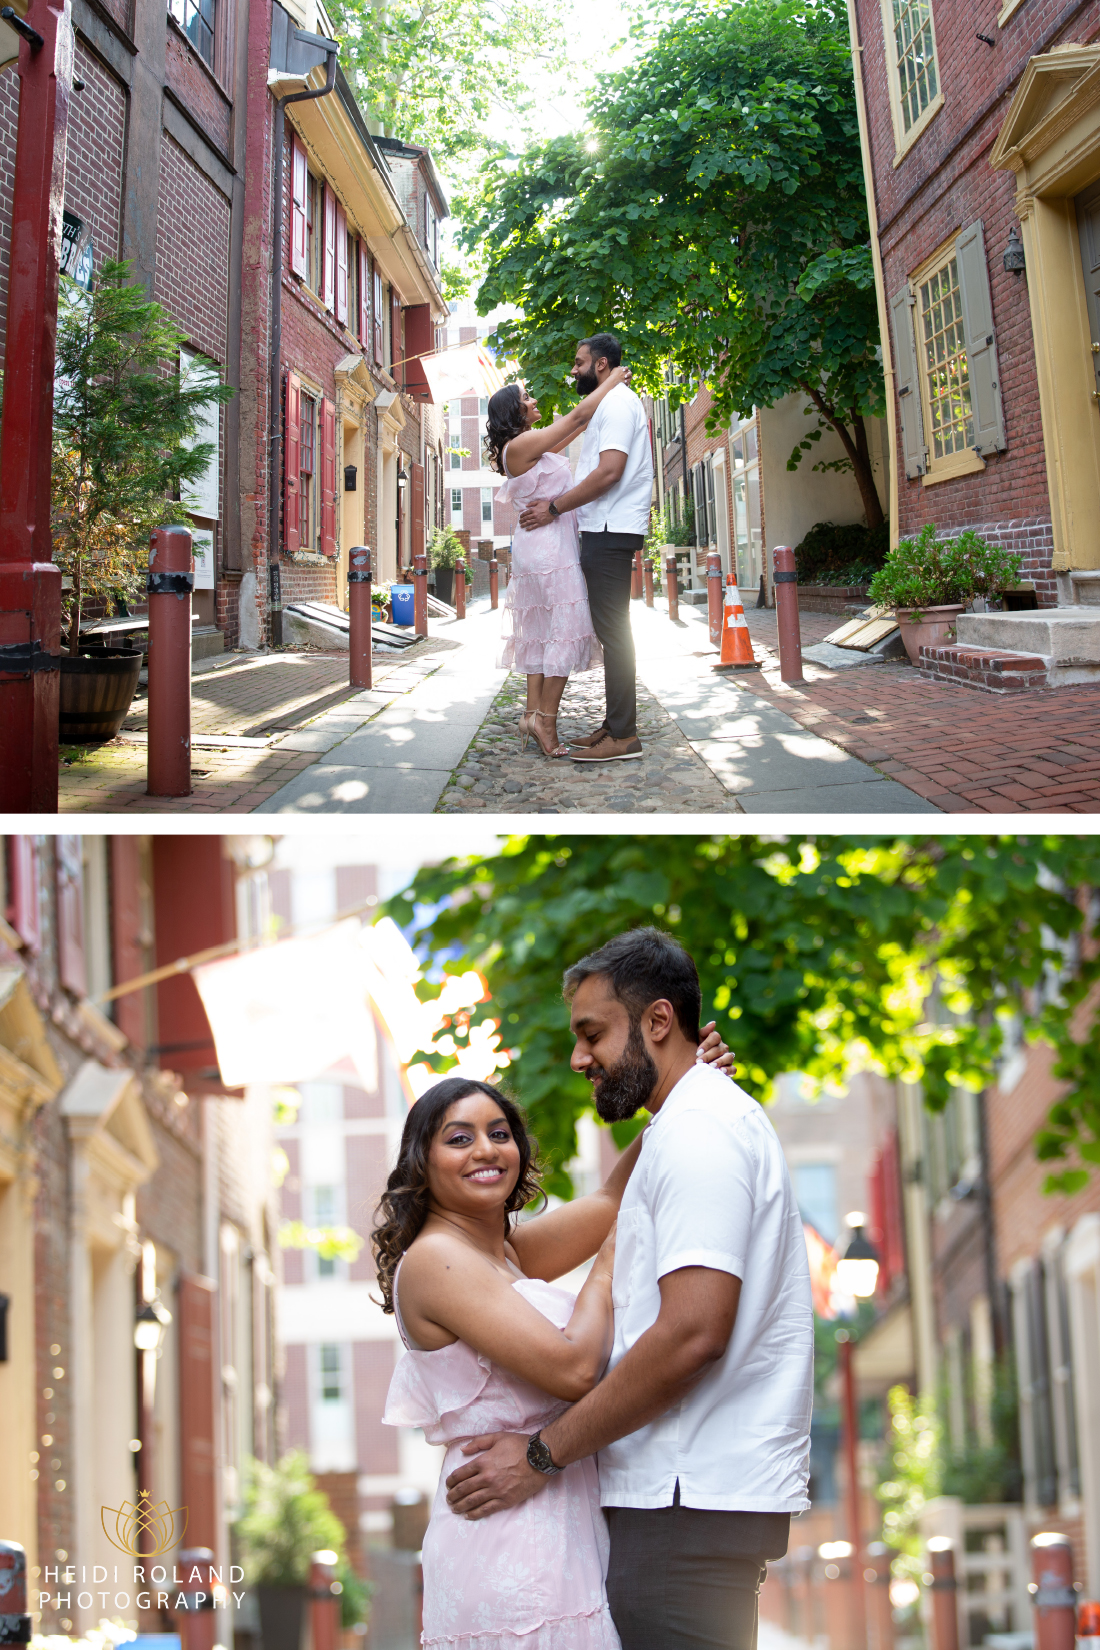 Elfreths Alley houses engagement photos by Heidi Roland Photography